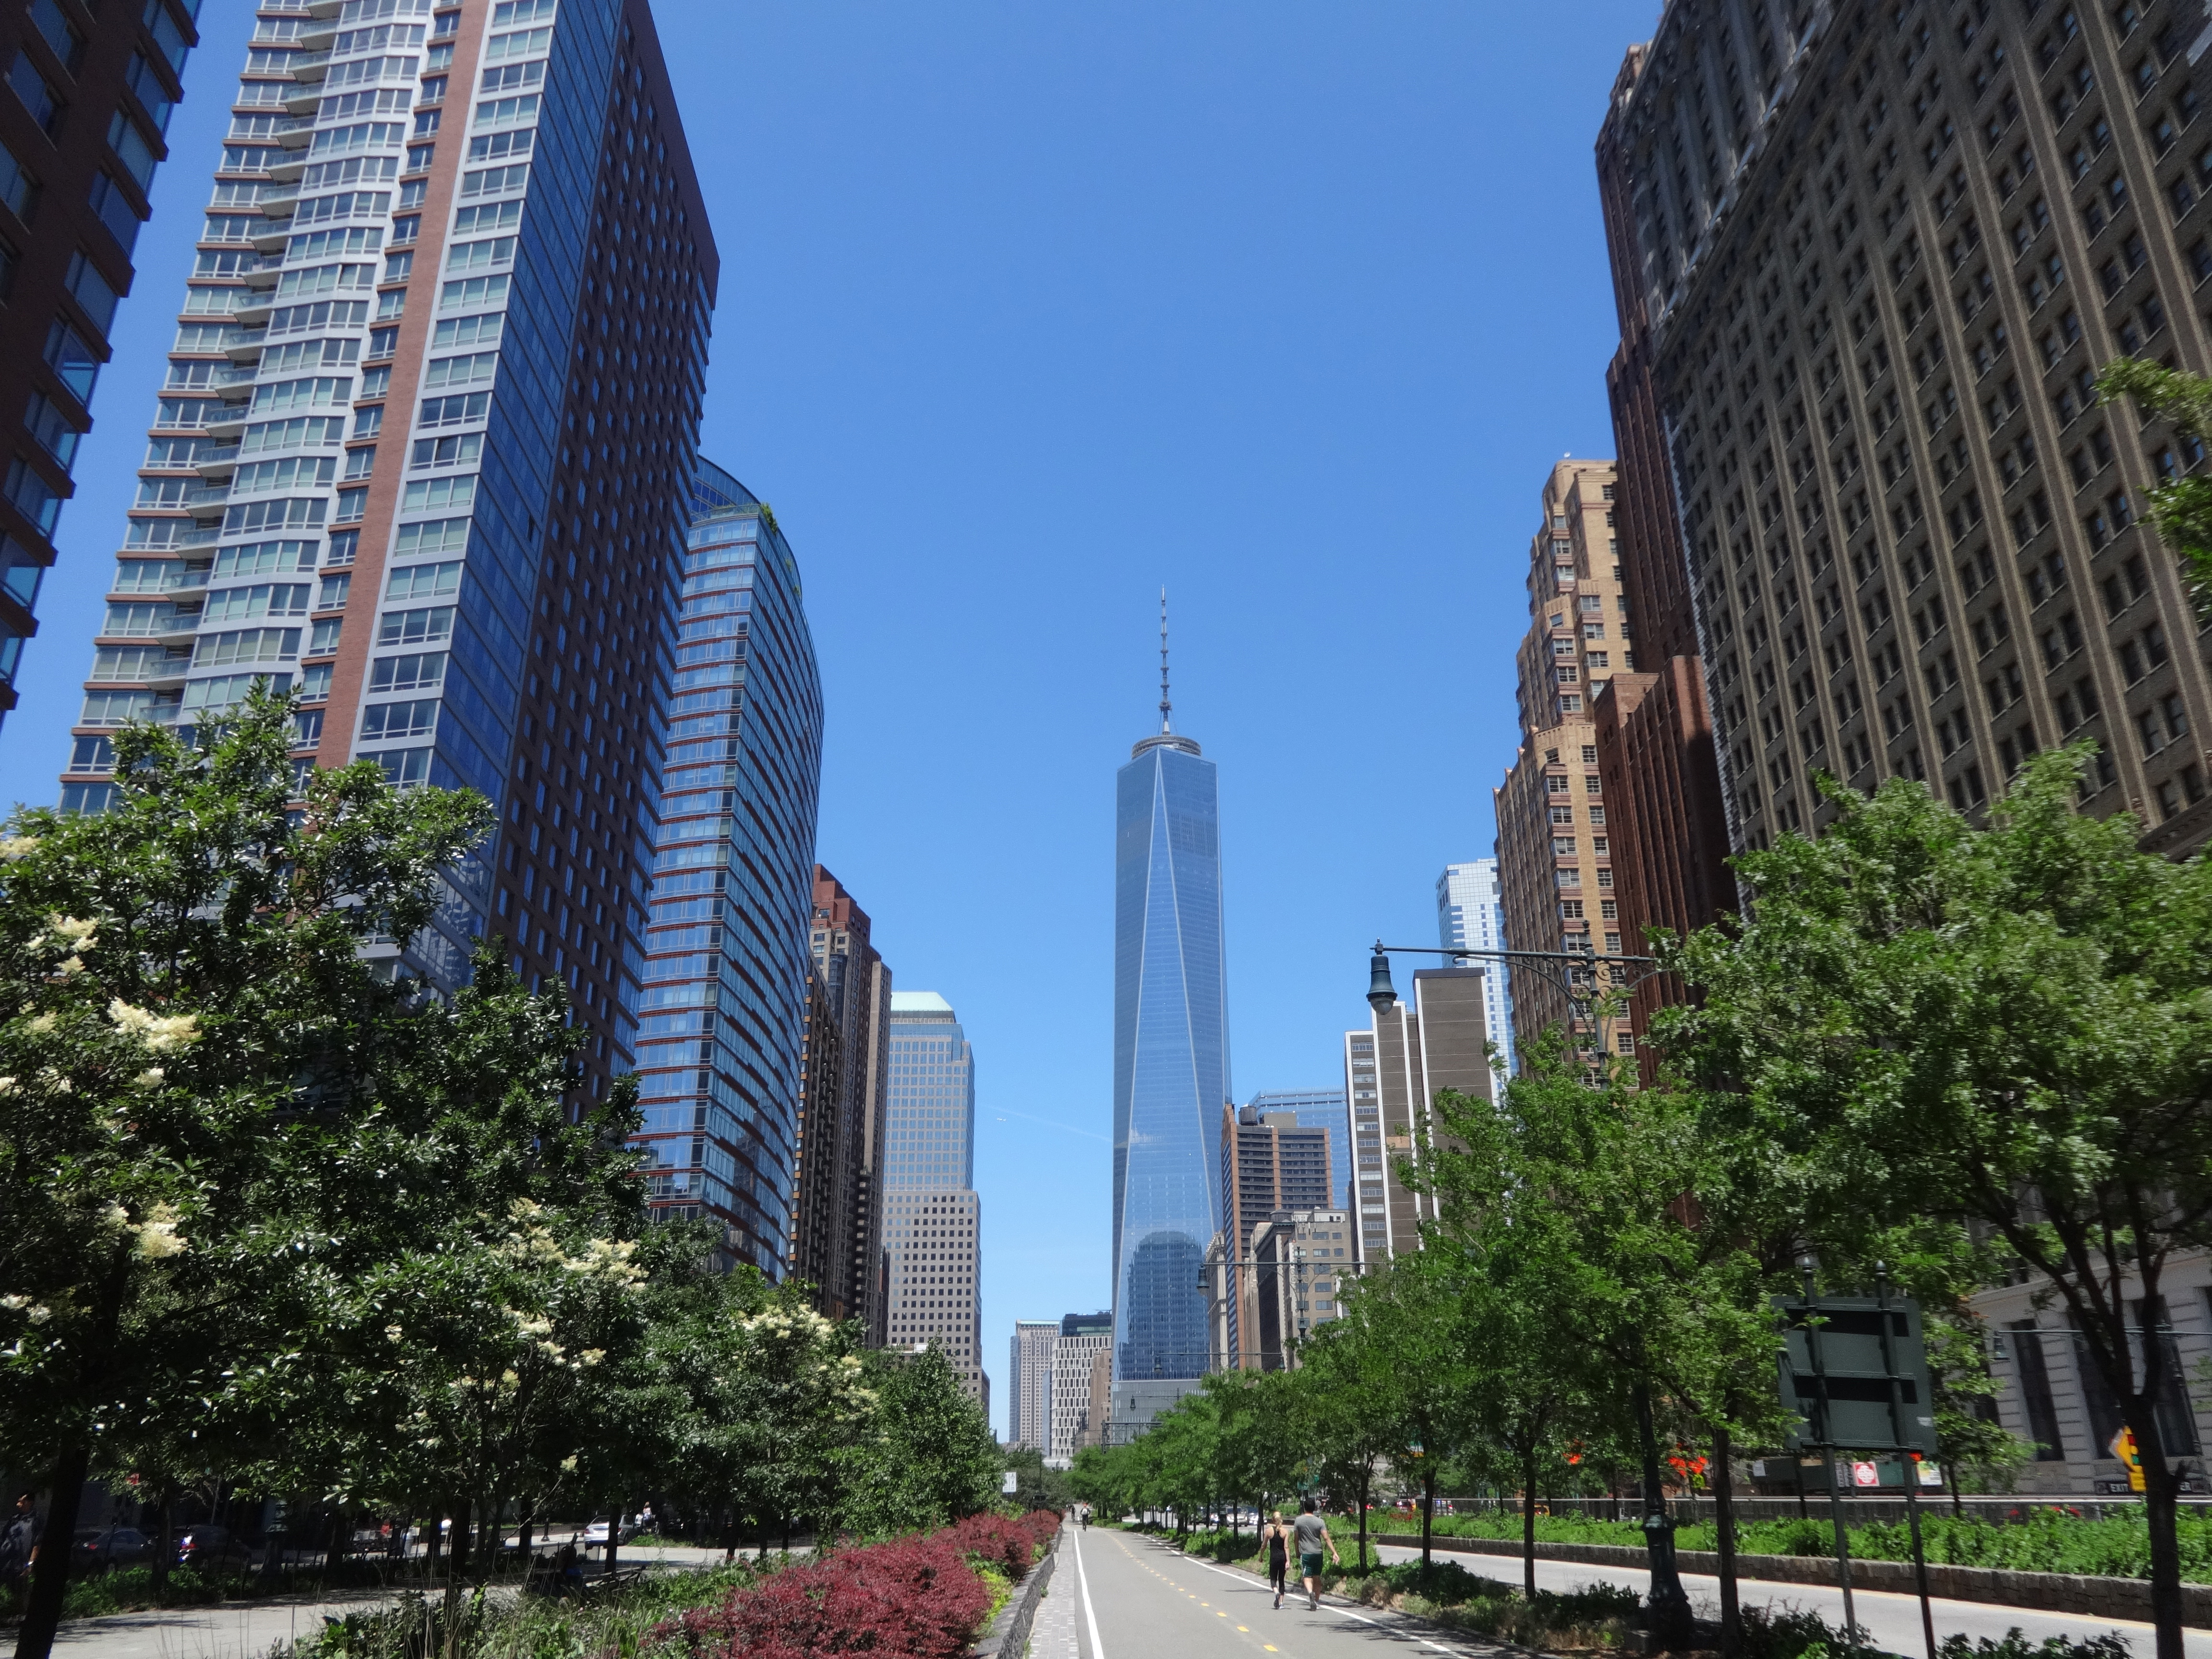 Freedom Tower and canyon of apartments in BPC 6-15-2014